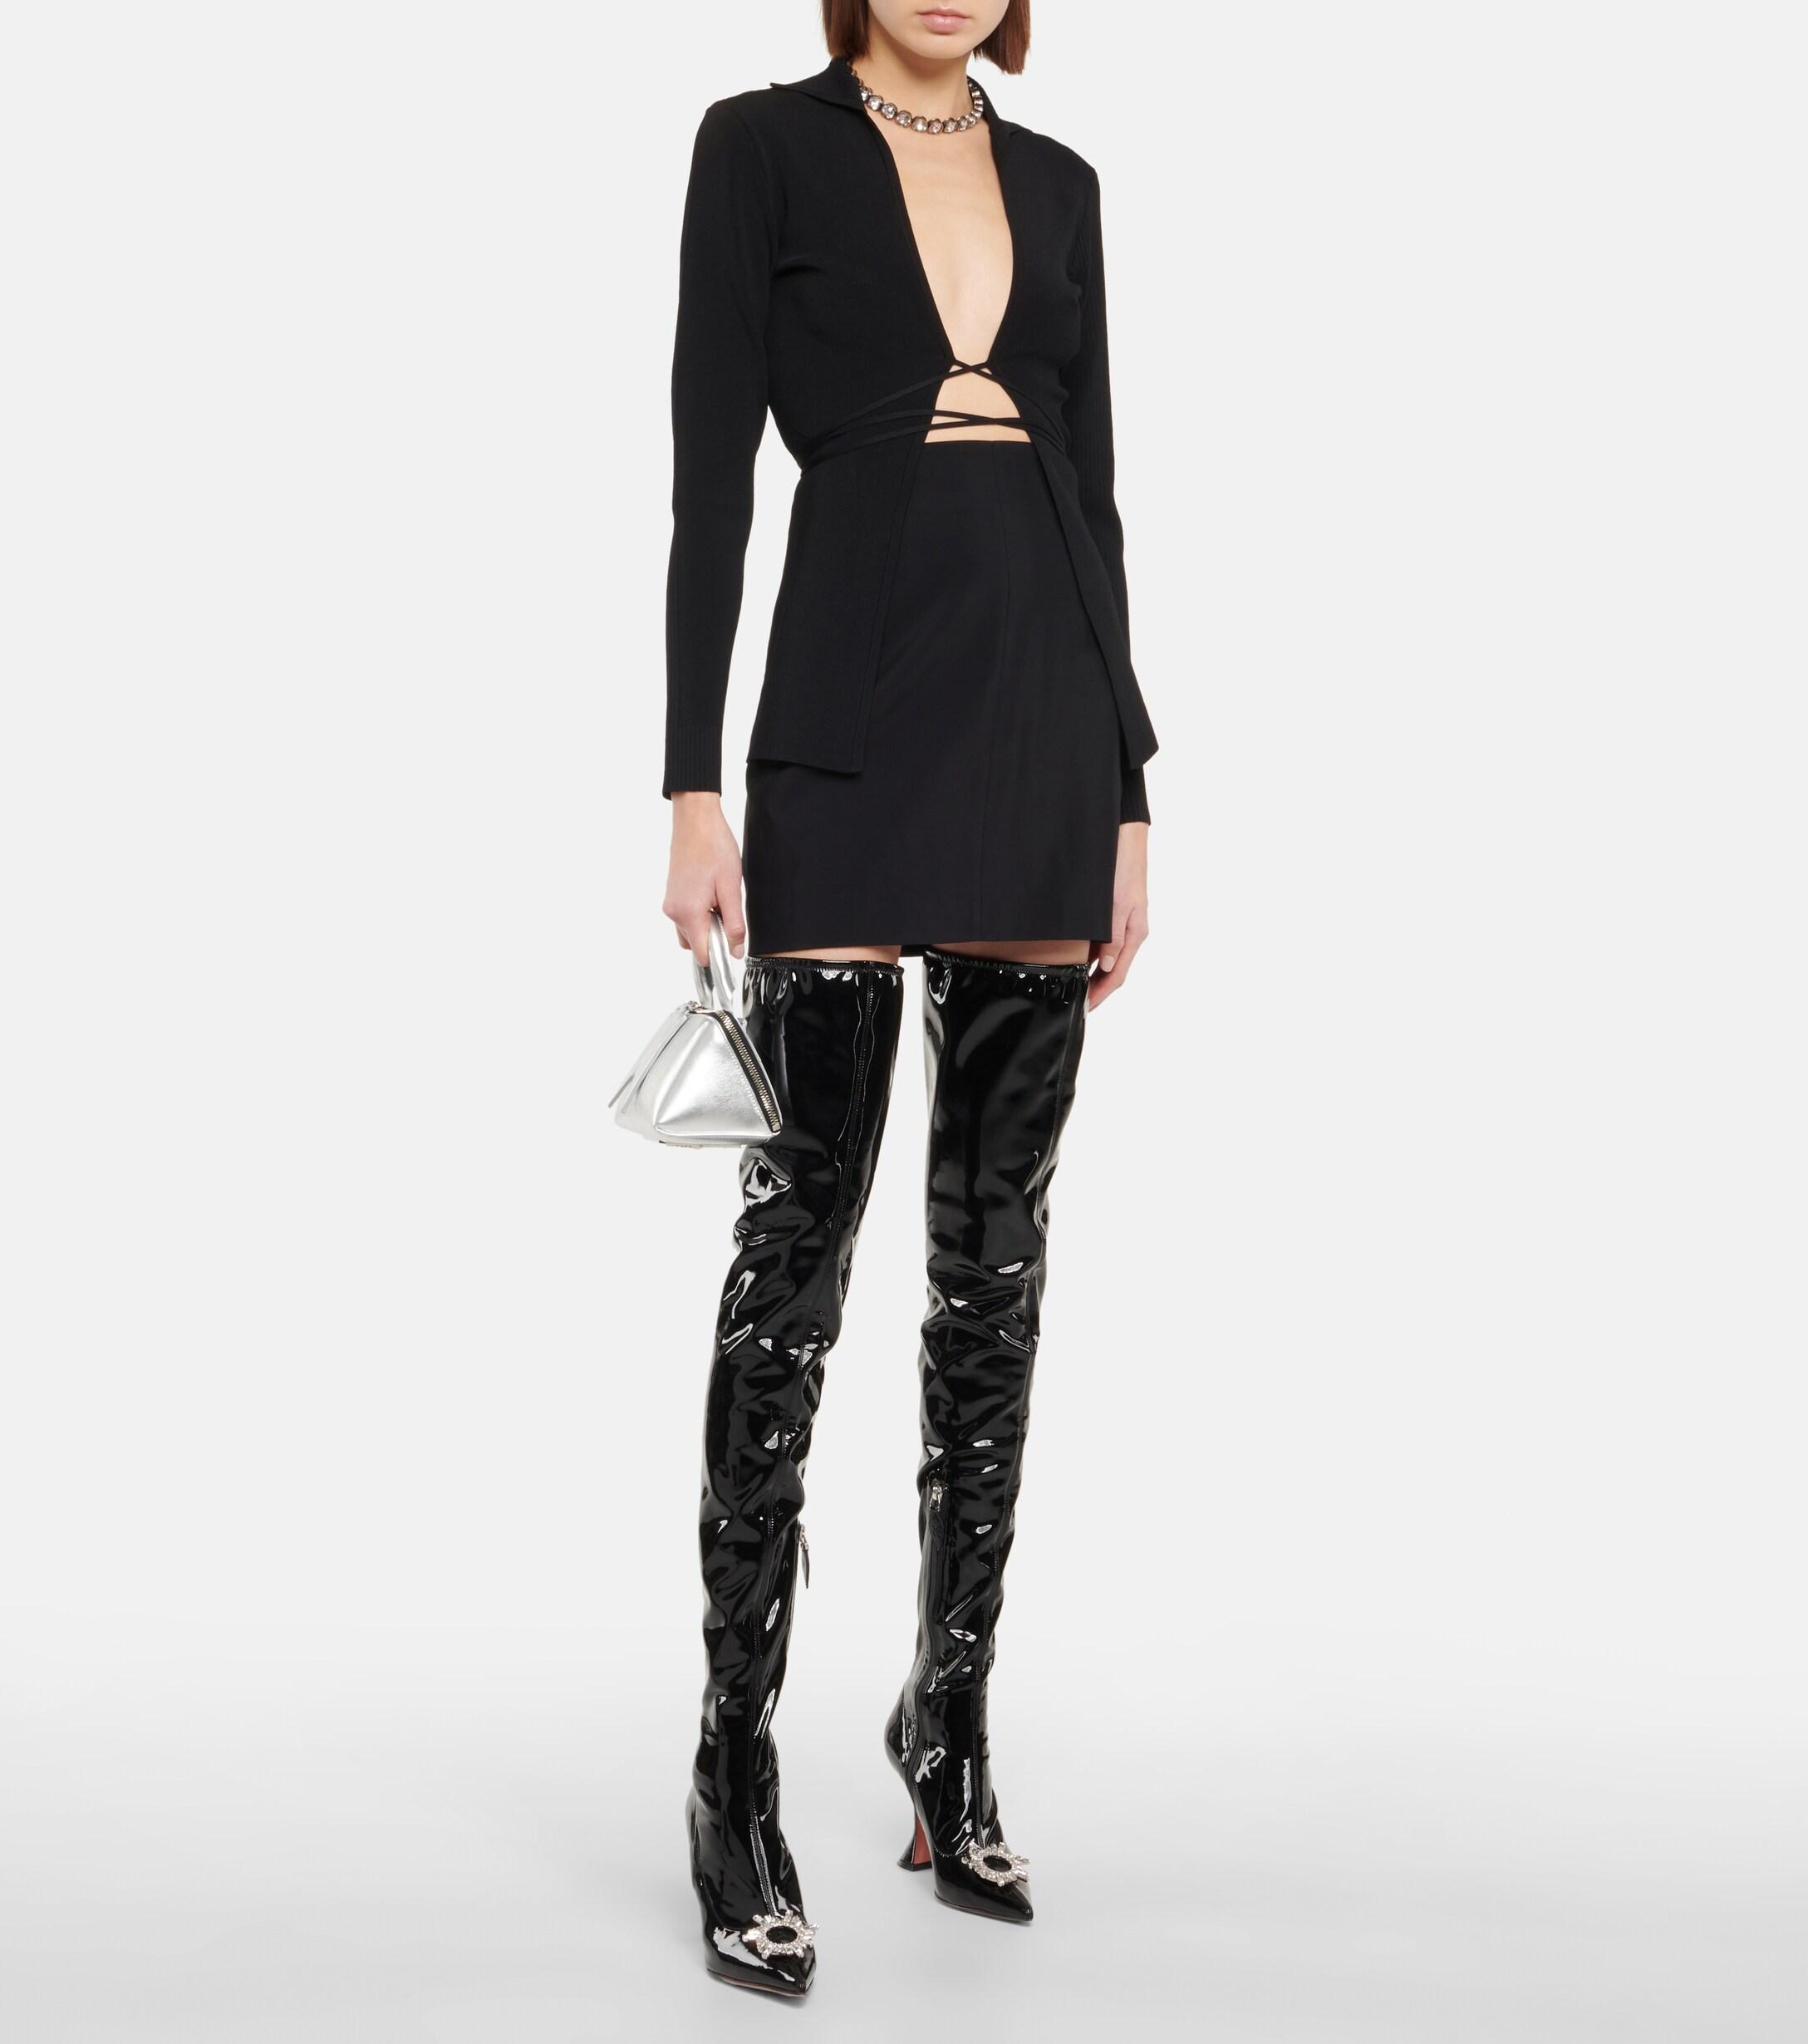 AMINA MUADDI Begum Latex Over-the-knee Boots in Black | Lyst